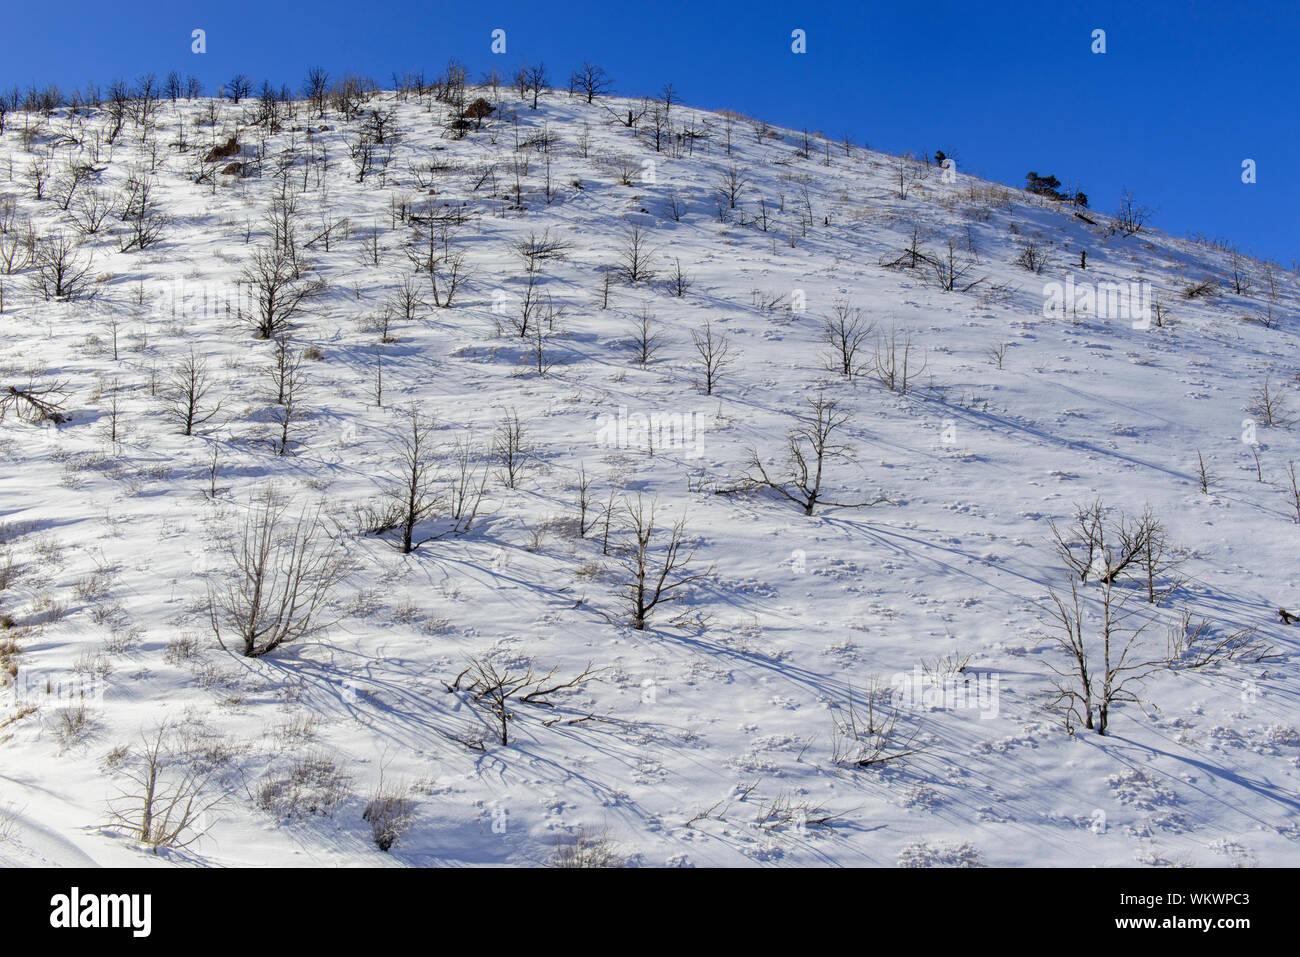 Burned trees in winter on the slopes of the La Sal mountains, Manti La Sal National Forest, Utah, USA Stock Photo